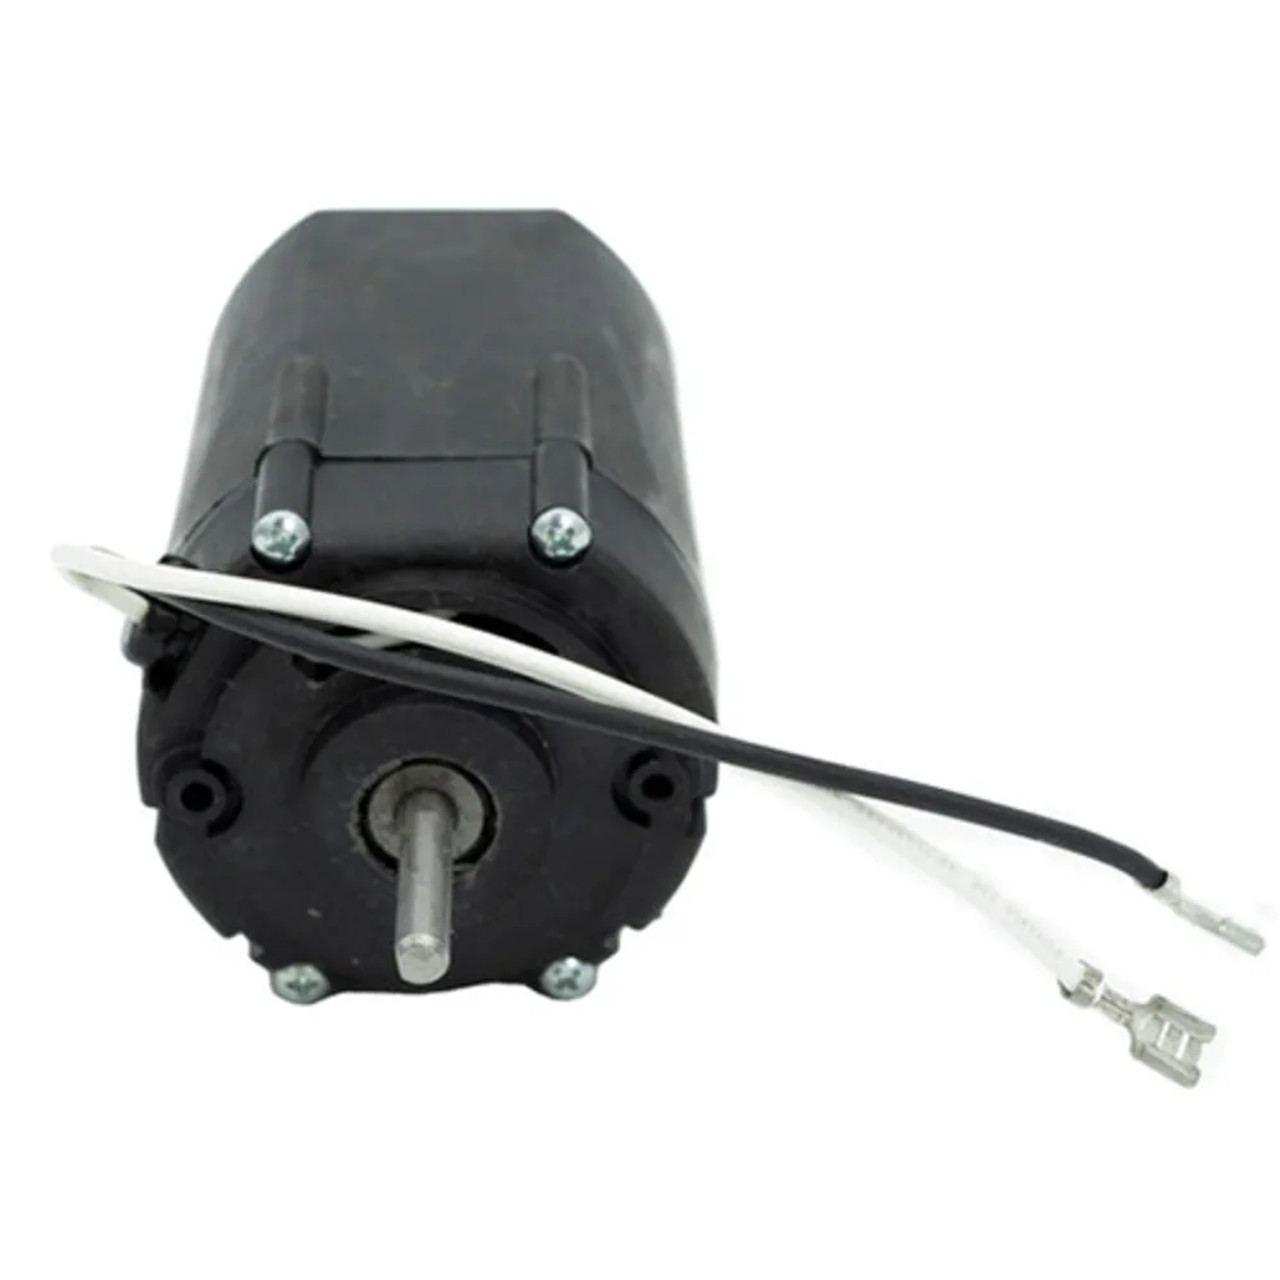 Pinnacle Dryer Dryer Motor for P3-12S - 115V - Chicken Pieces